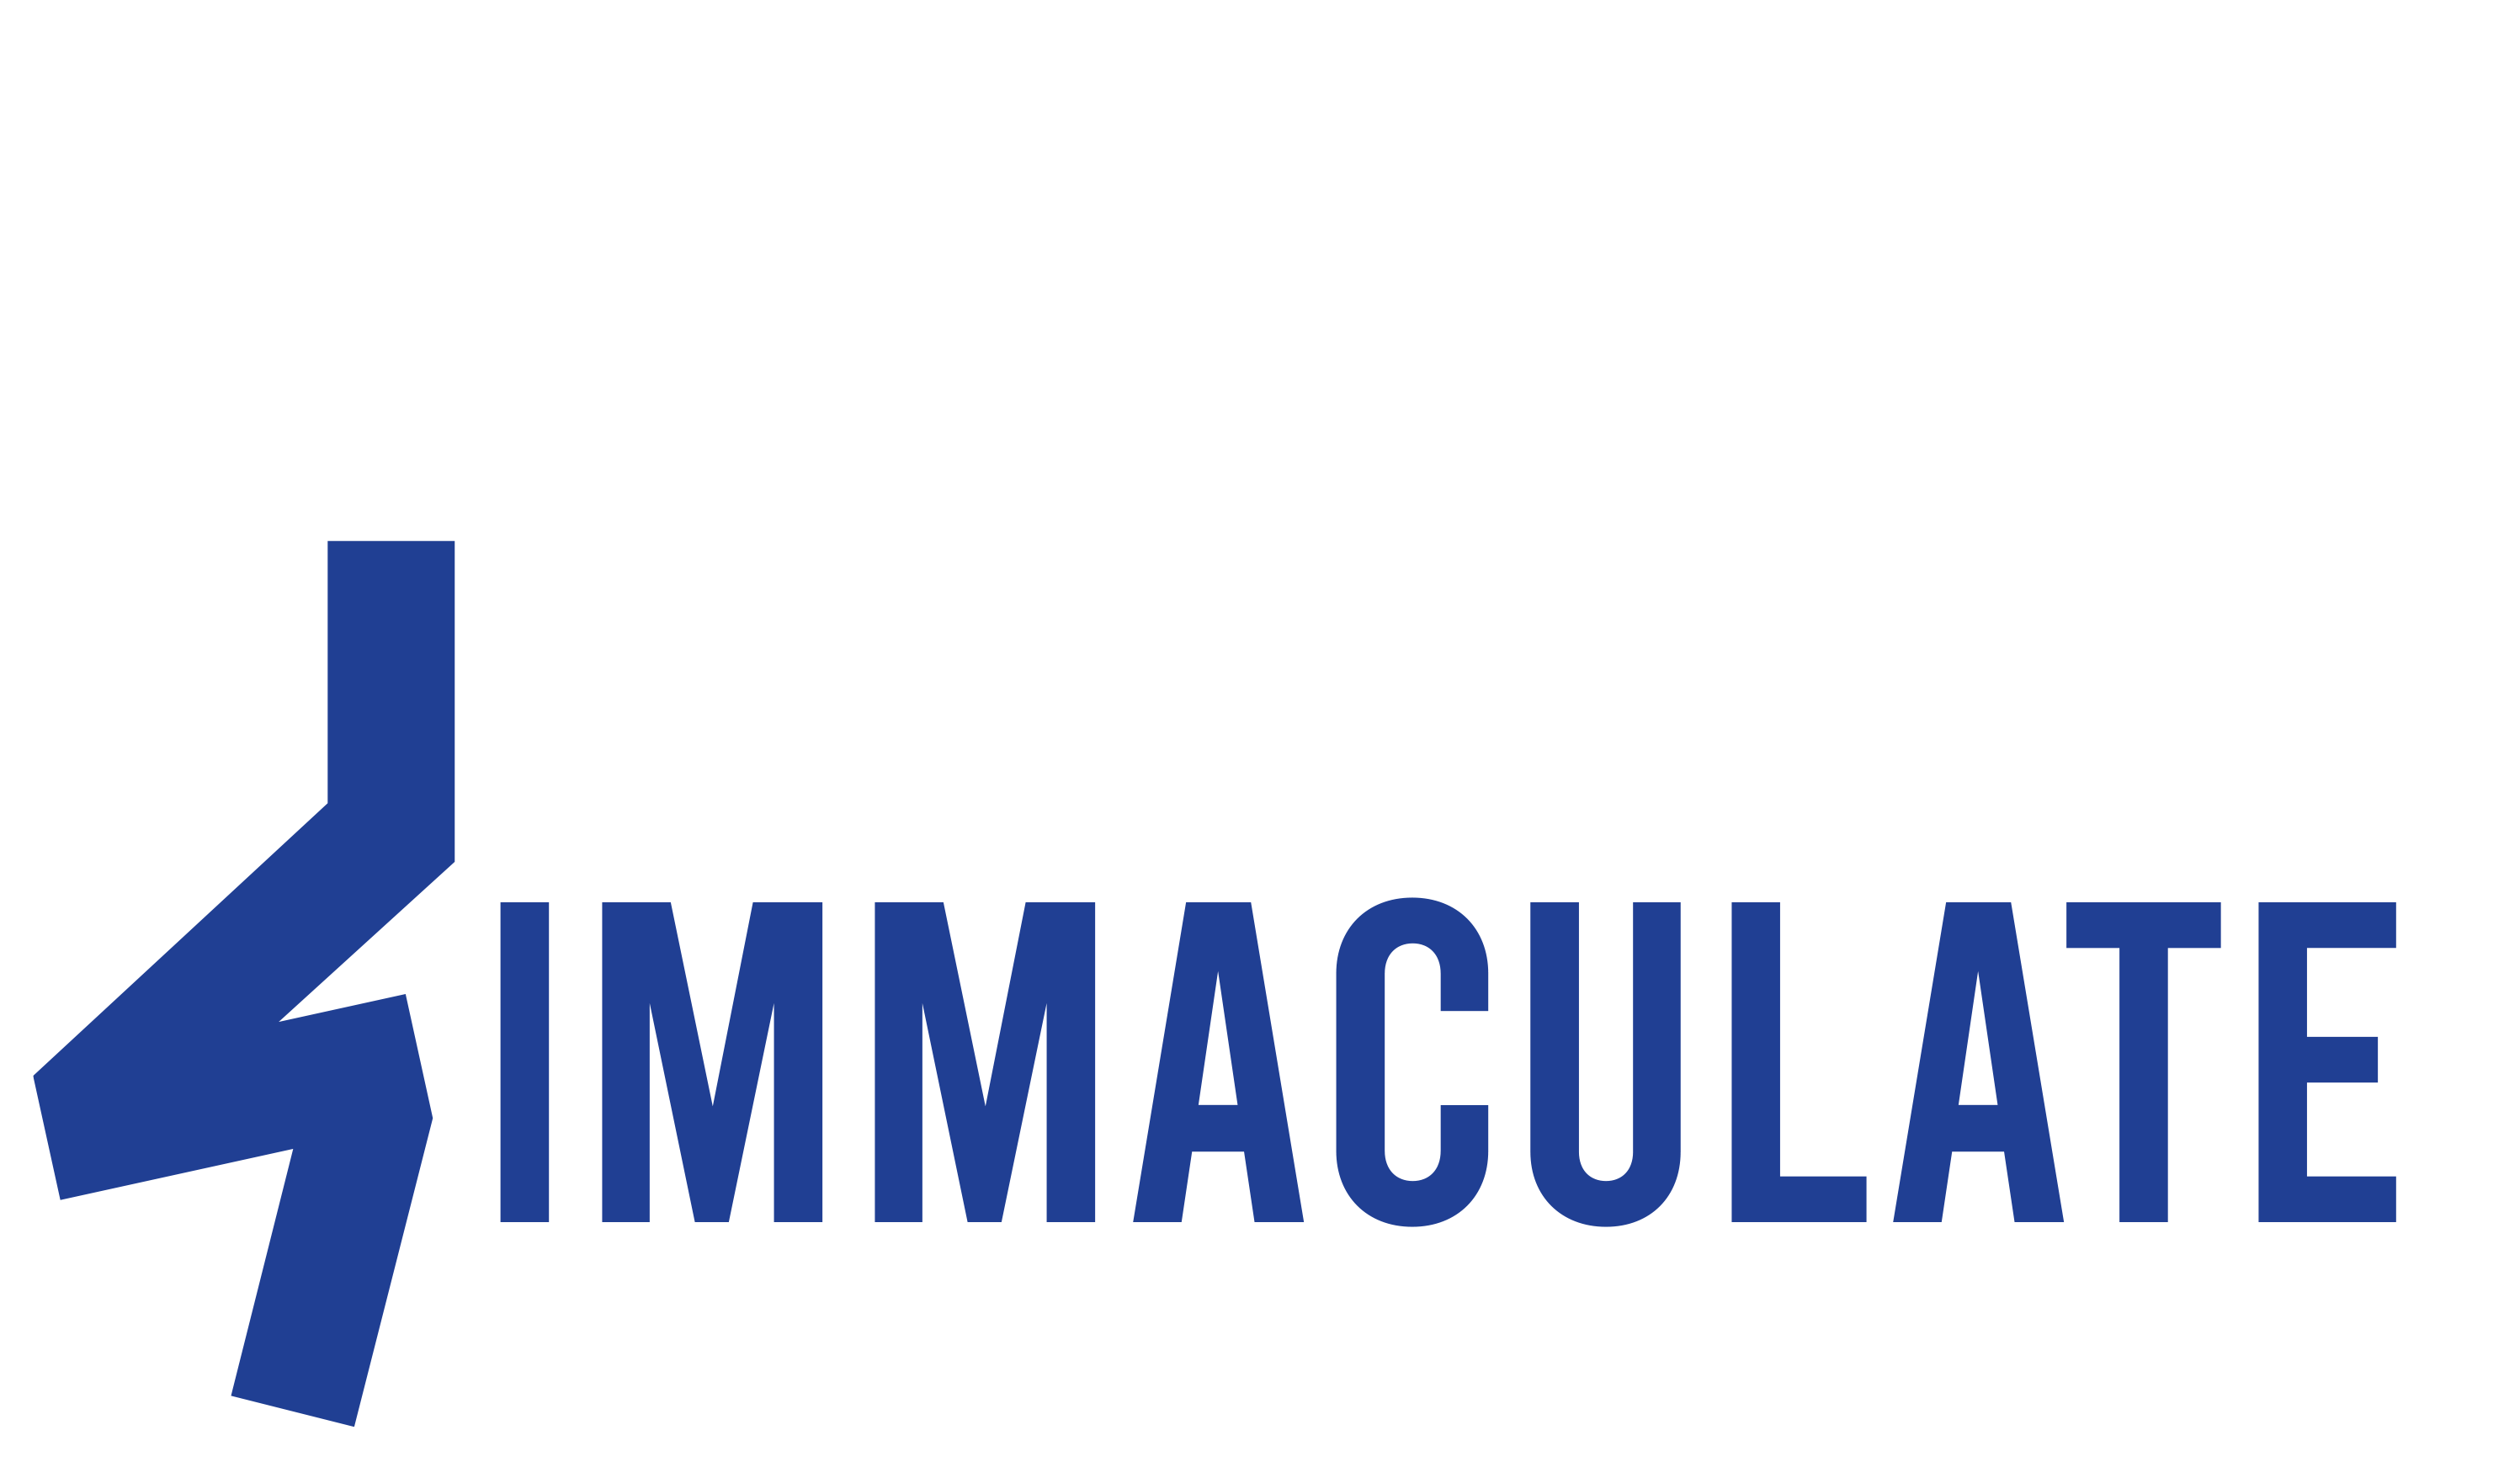 Crossfit Immaculate in Almere